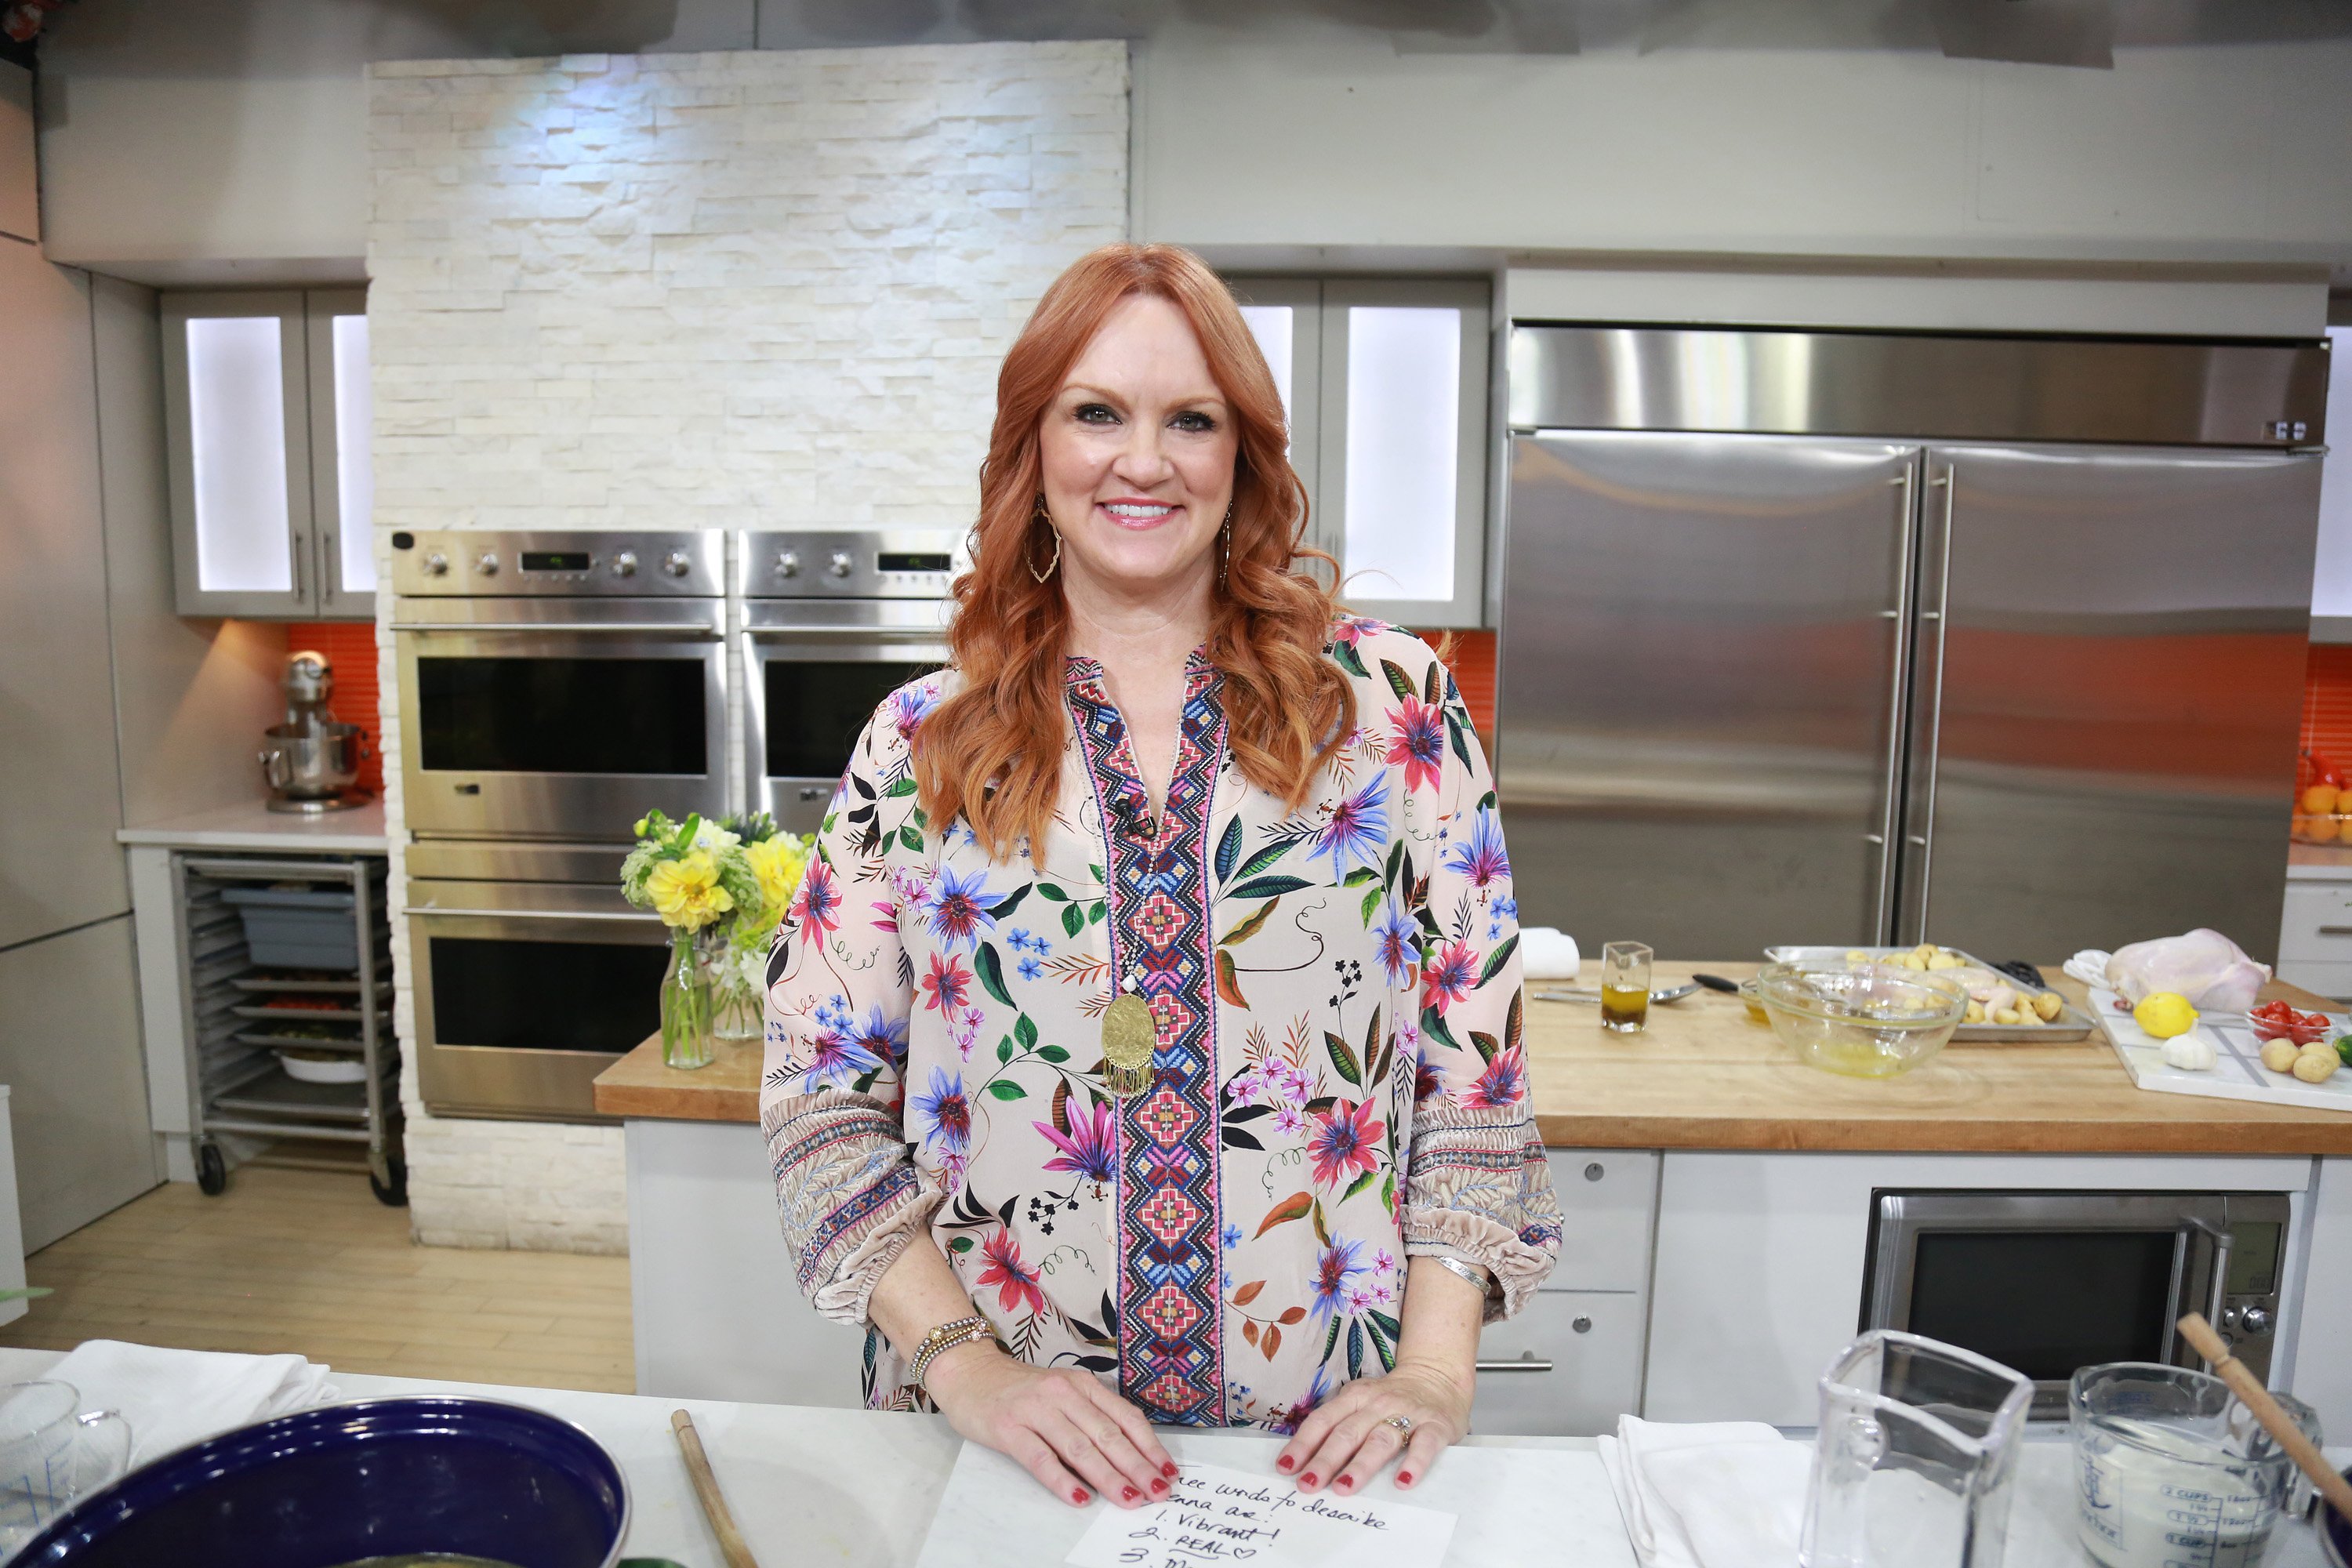 Ree Drummond on the 'Today' show